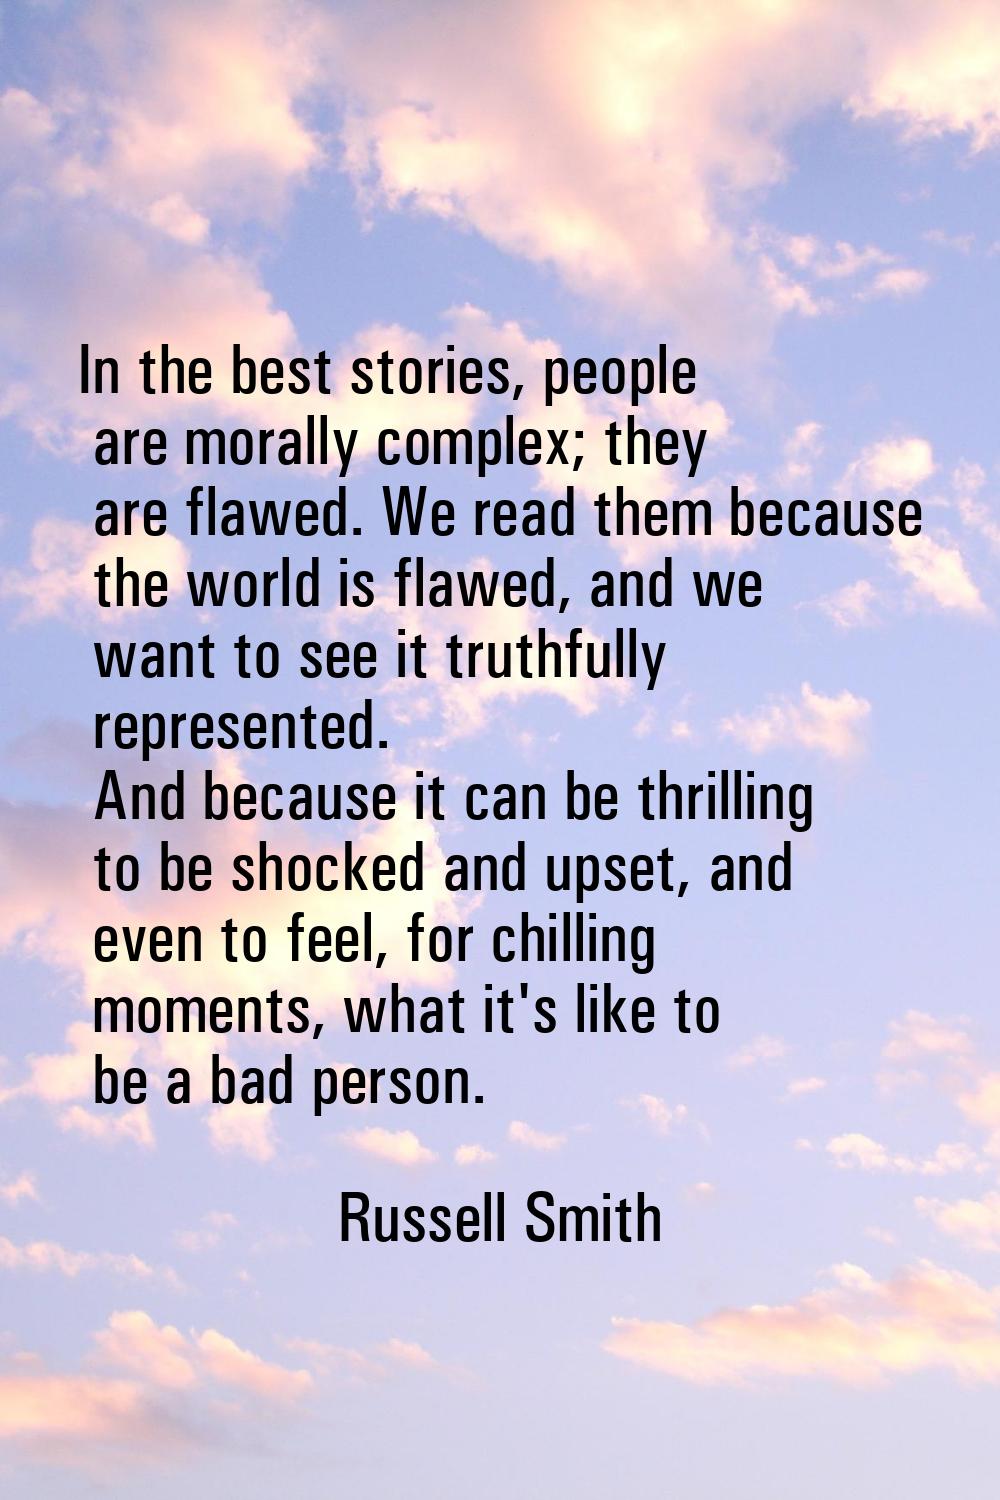 In the best stories, people are morally complex; they are flawed. We read them because the world is